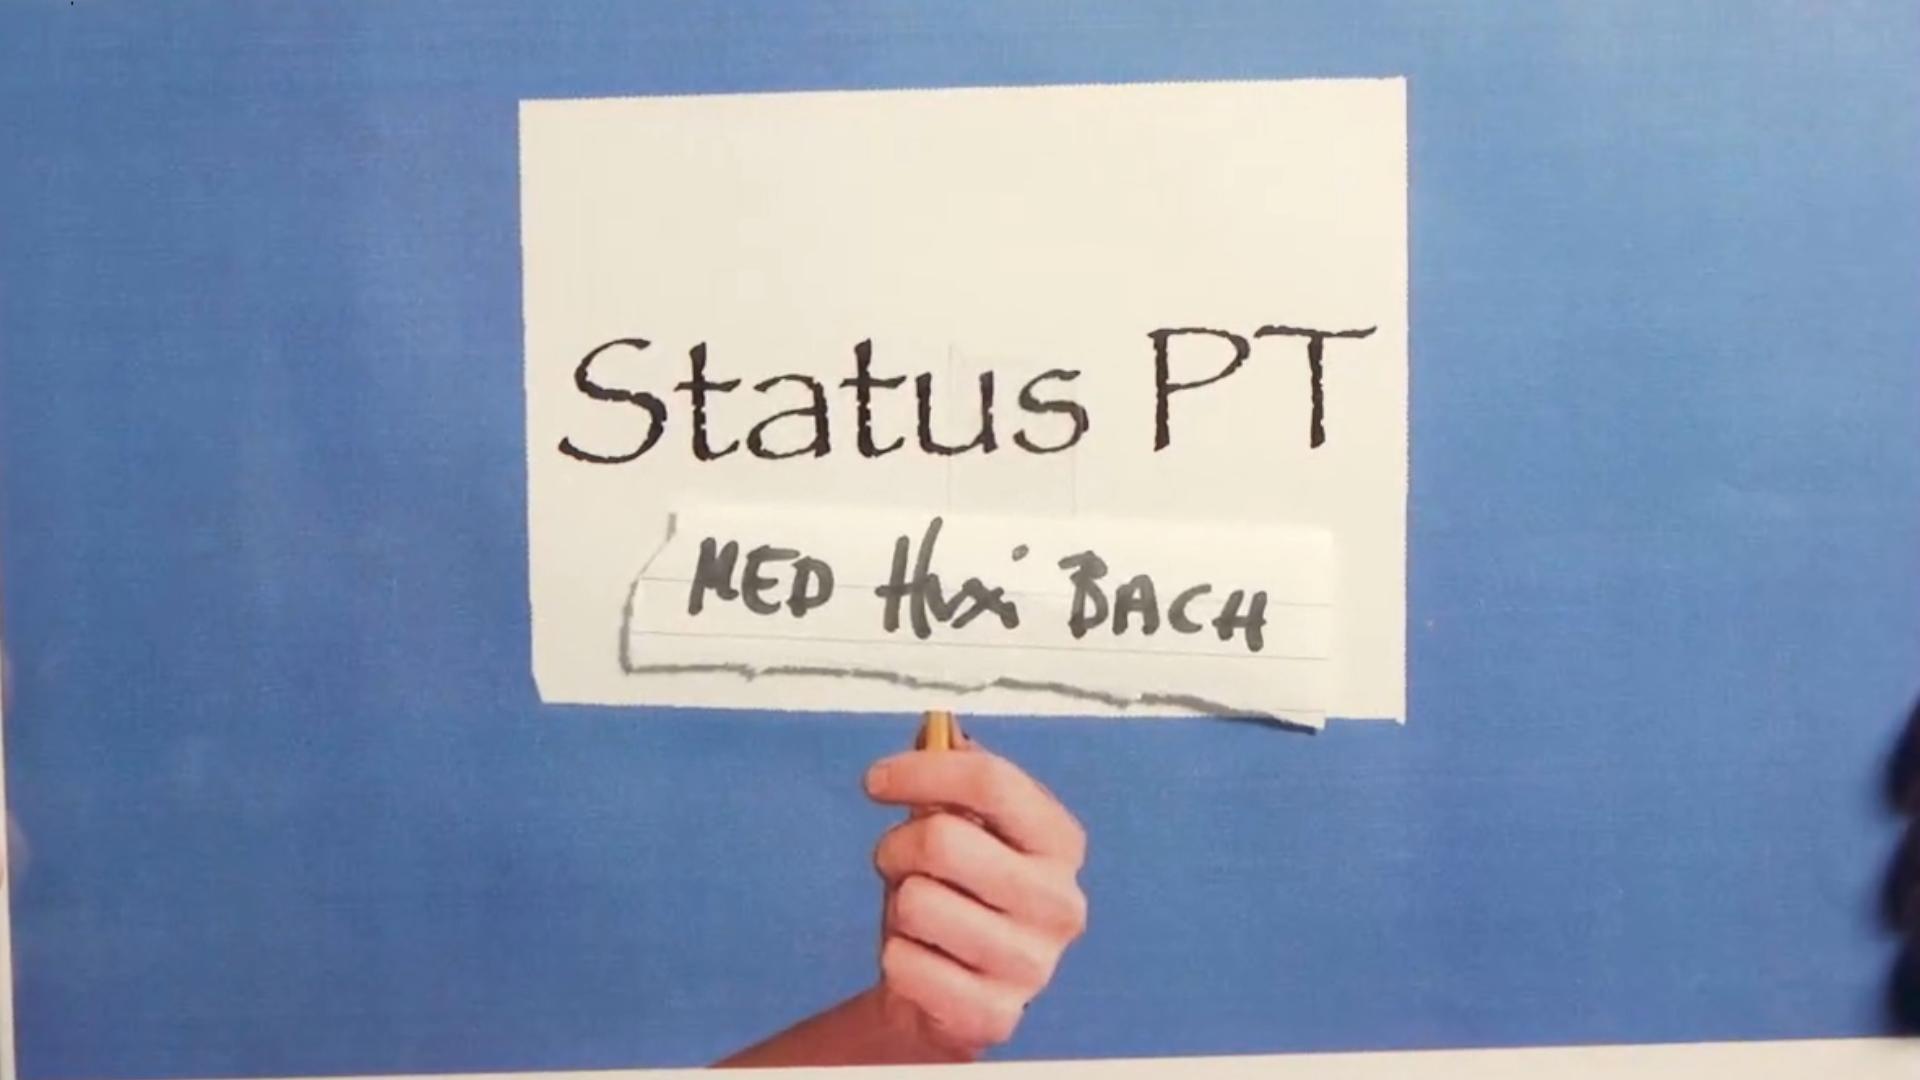 Status P.T. Med Huxi Bach